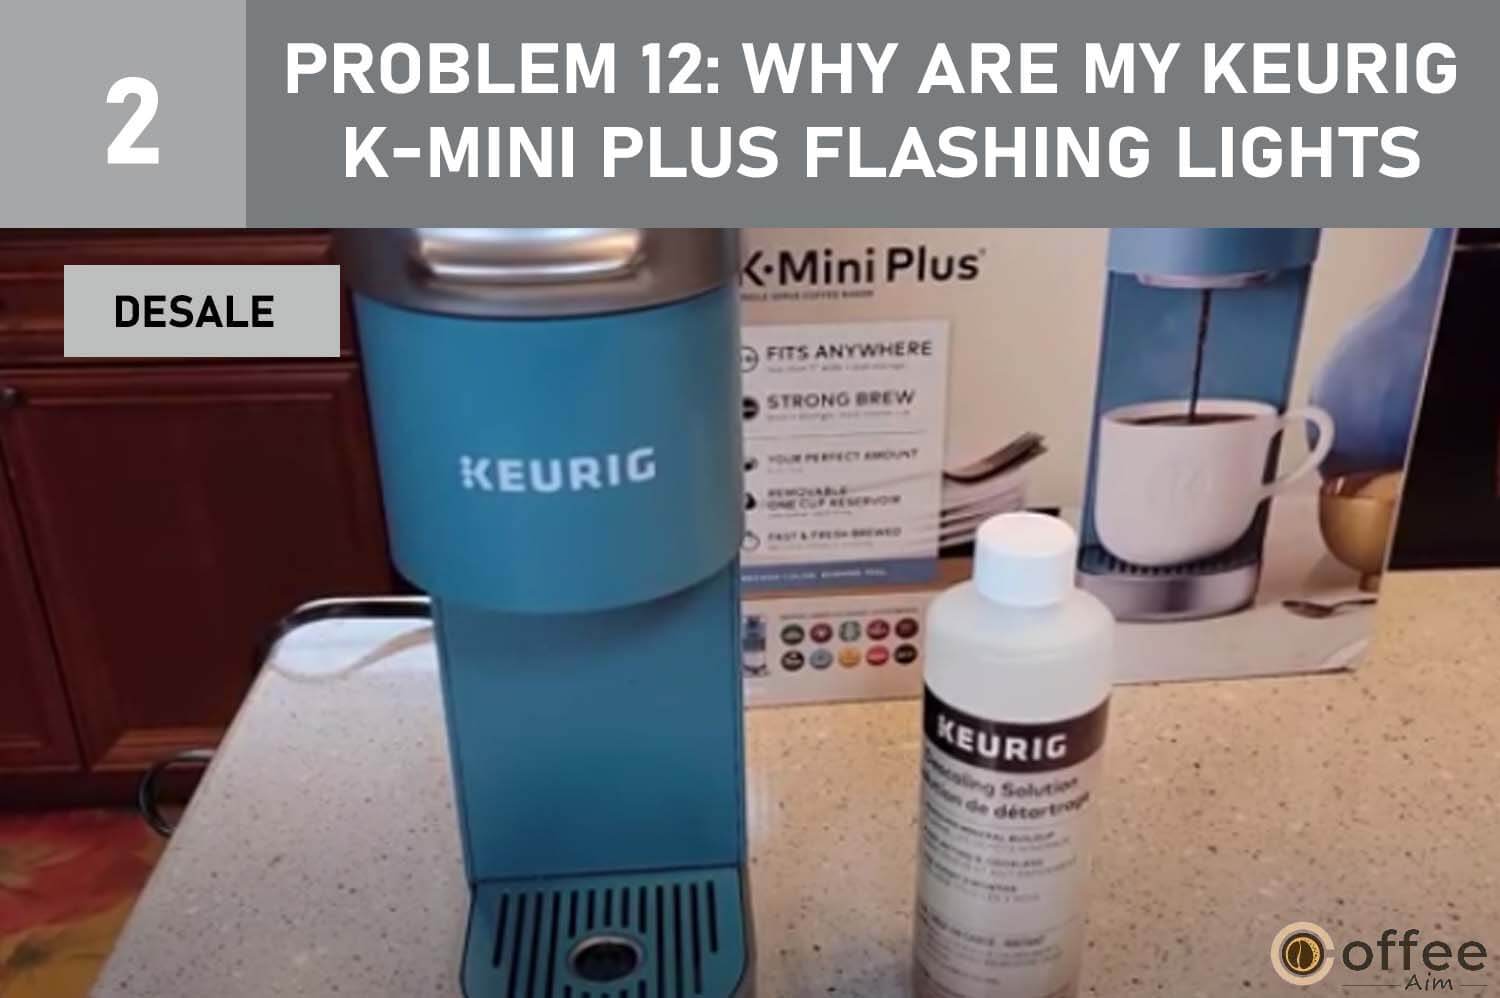 This image illustrates the "Descale" process for addressing the issue of problem 12: flashing lights in your Keurig K-Mini Plus, as discussed in our article on "Keurig K-Mini Plus Problems."




